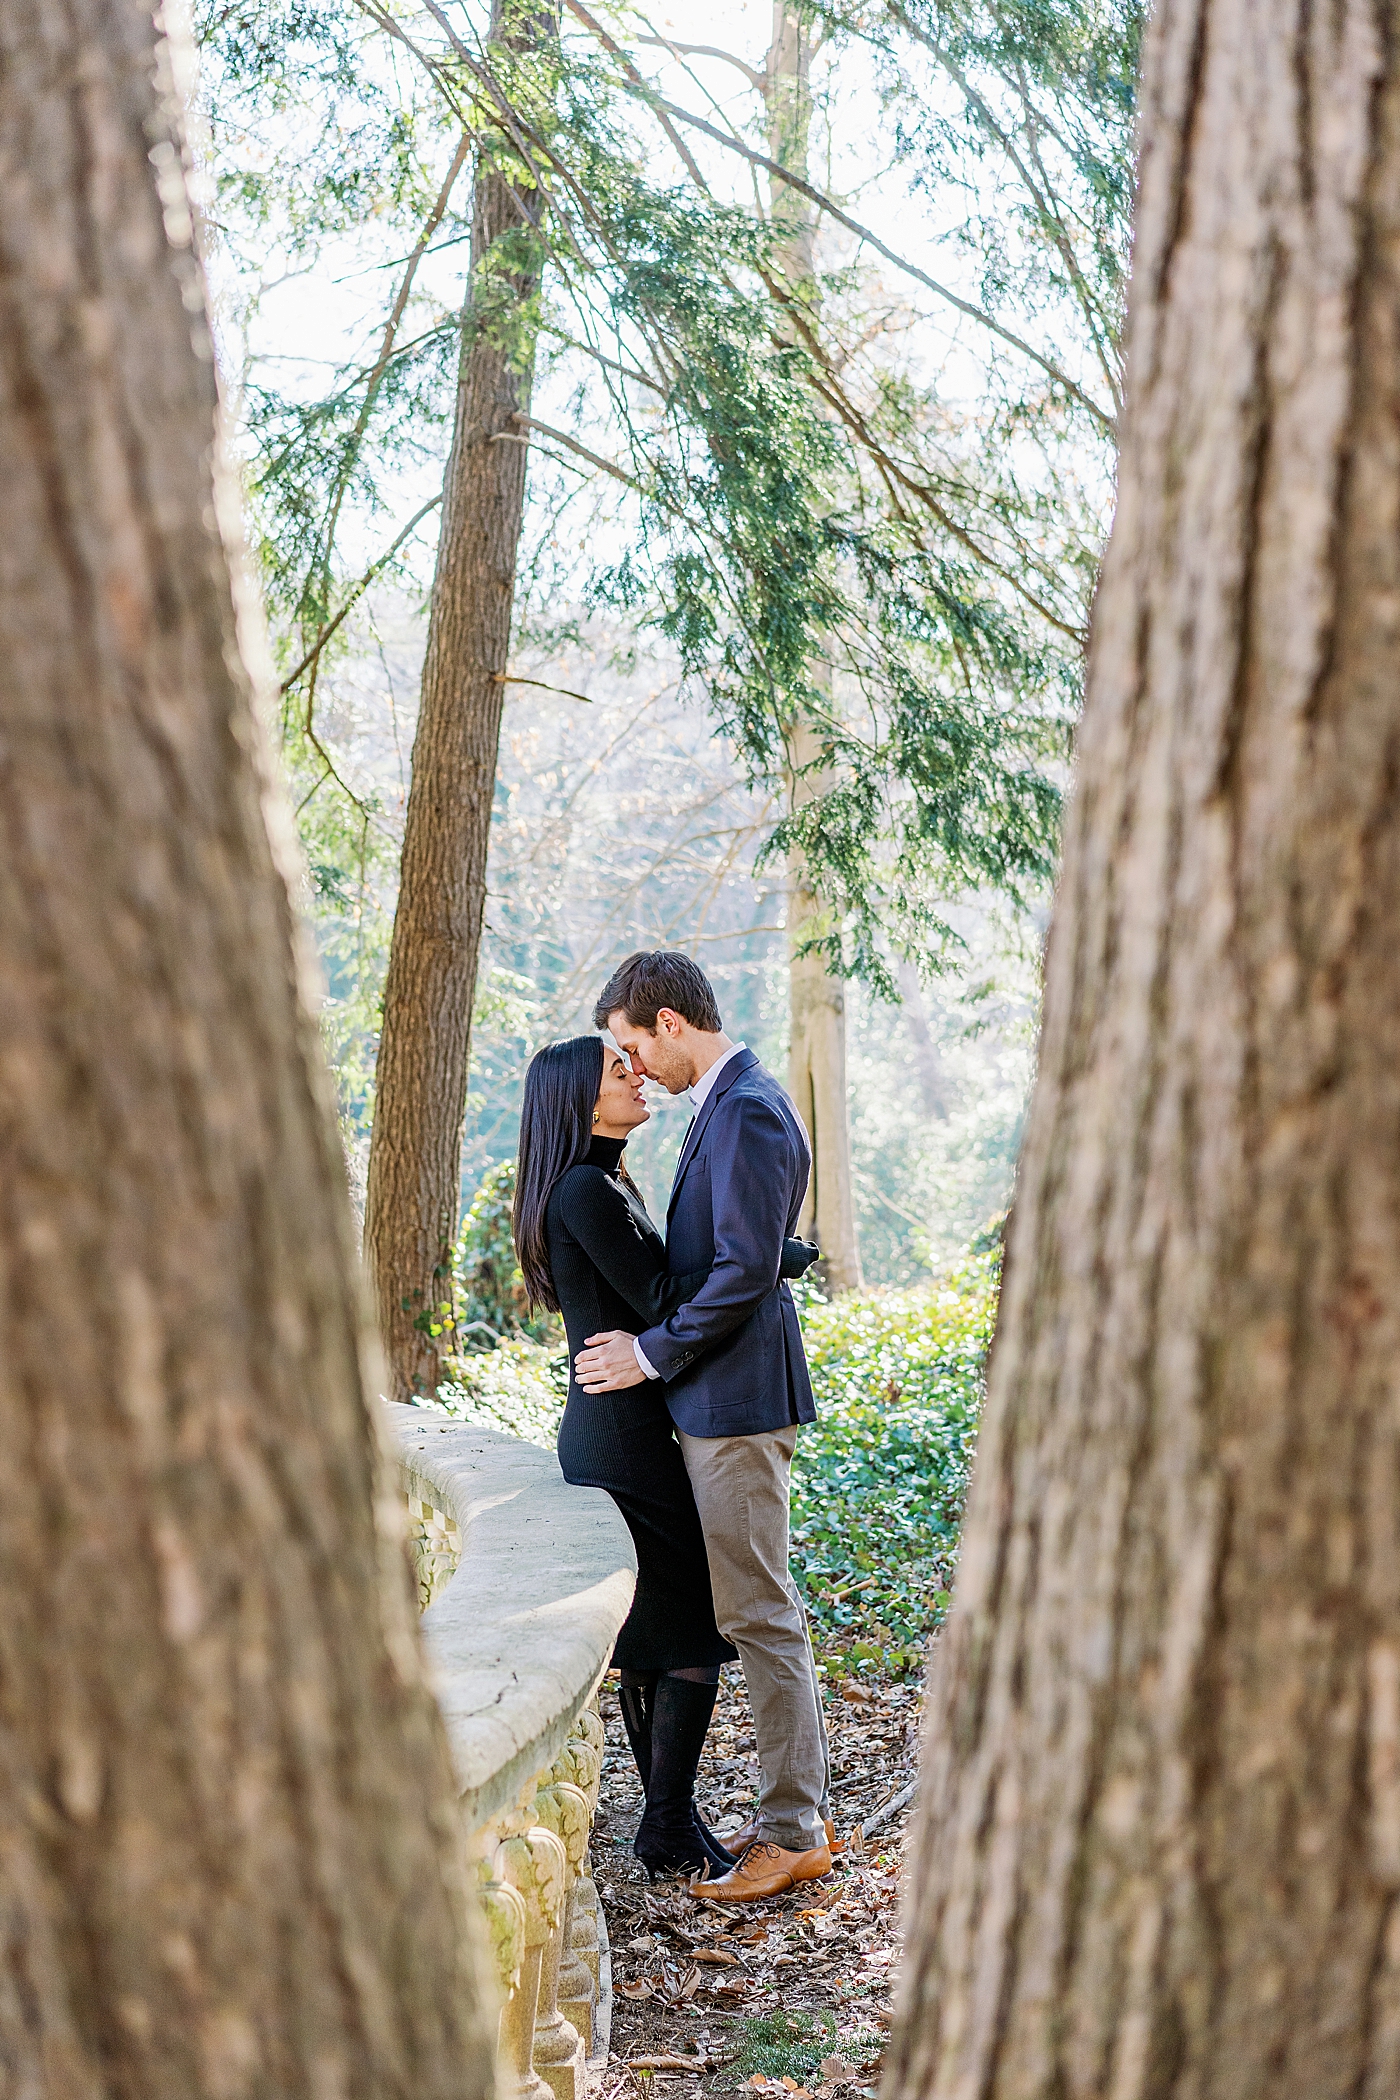 Couple with their foreheads together through two trees | Image by Annie Laura Photo